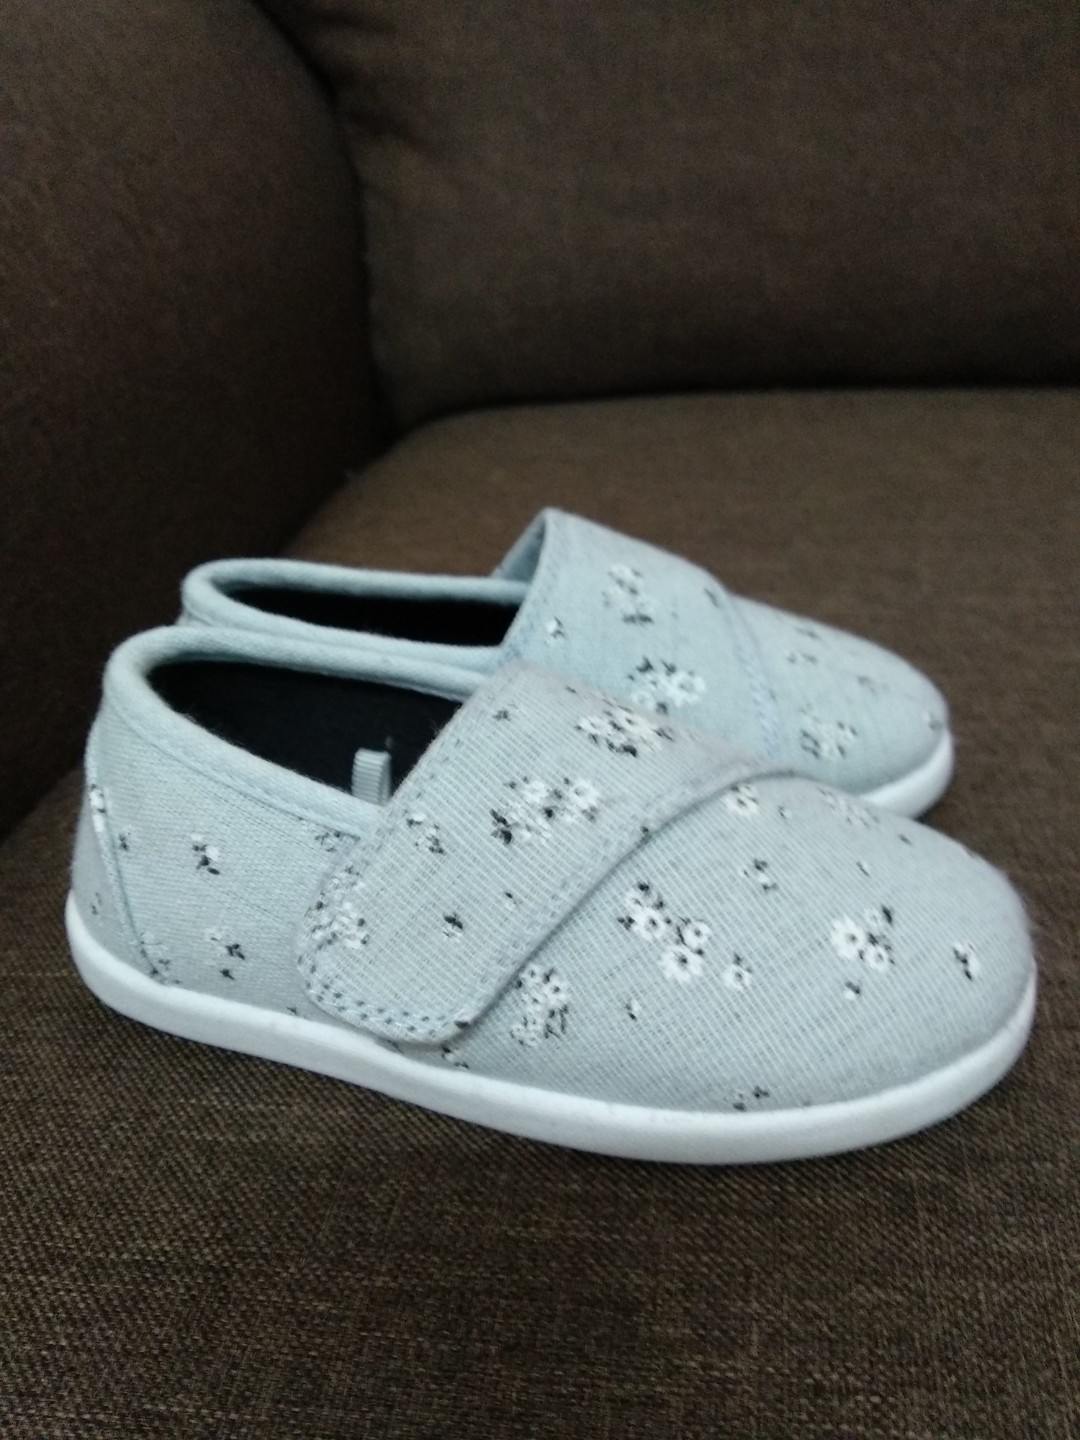 Mothercare kids shoes size 5, Babies 